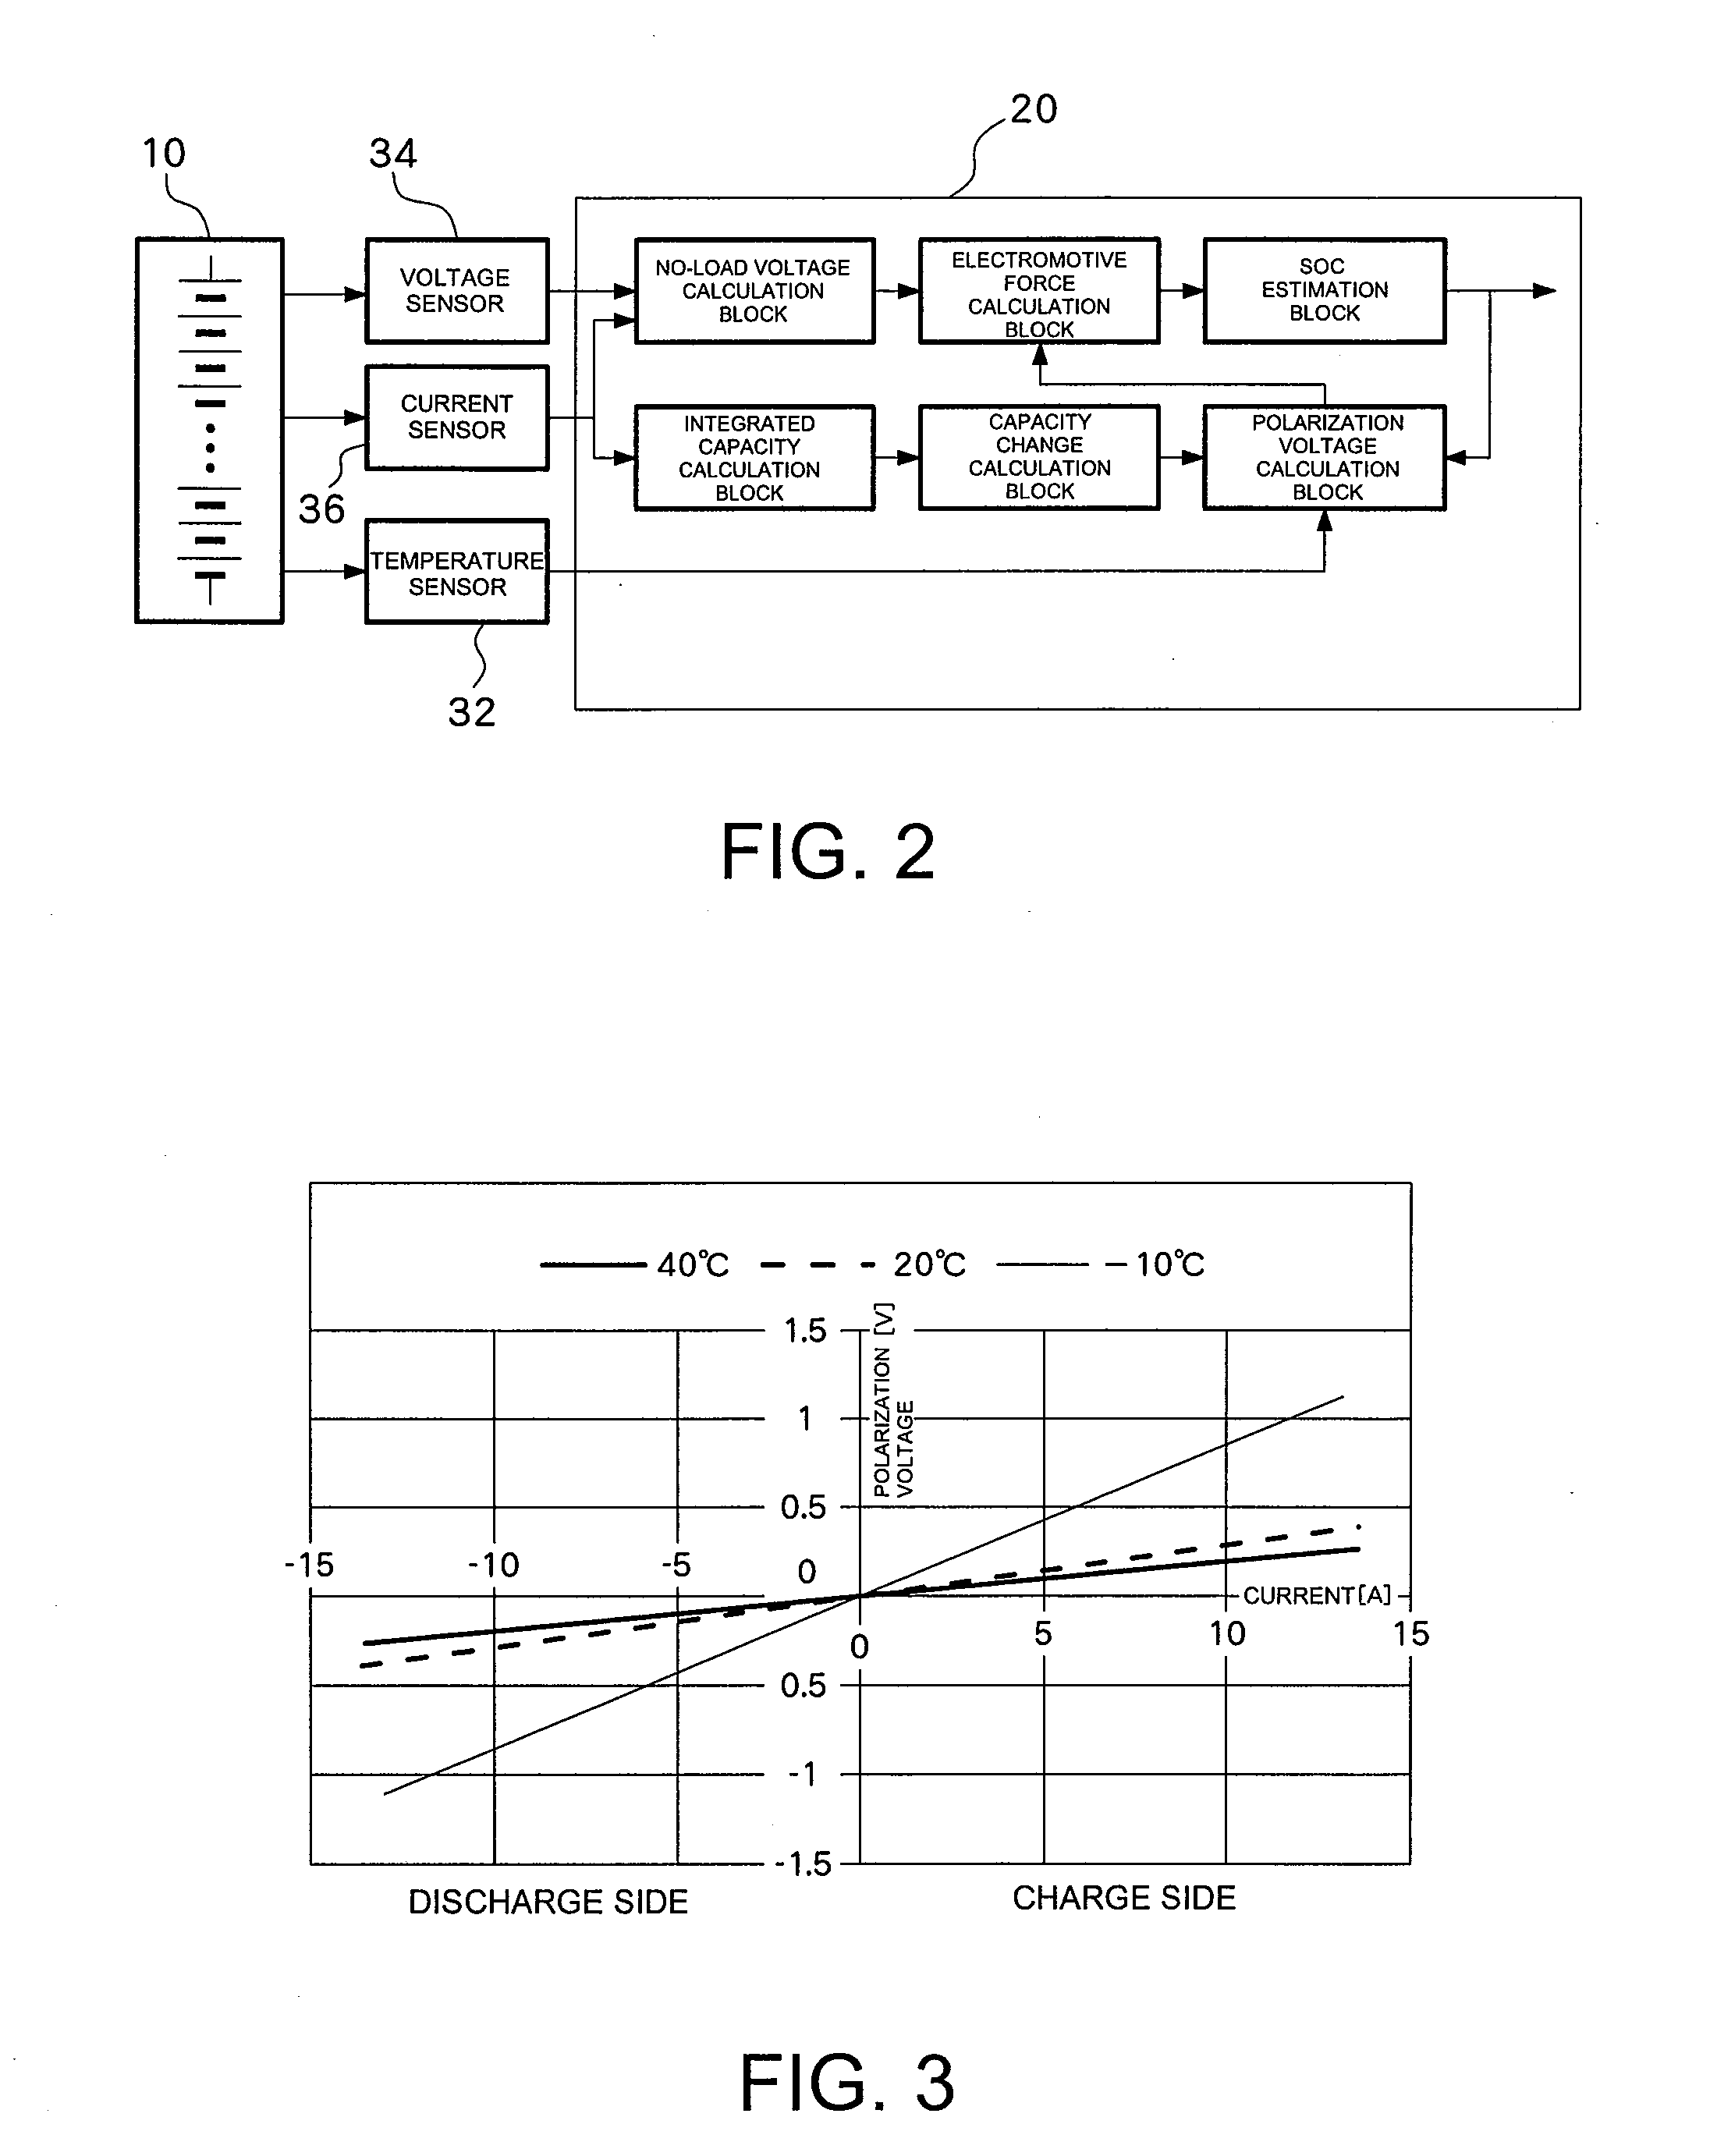 Apparatus for calculating polarization voltage of secondary battery and apparatus for estimating state of charge of the same